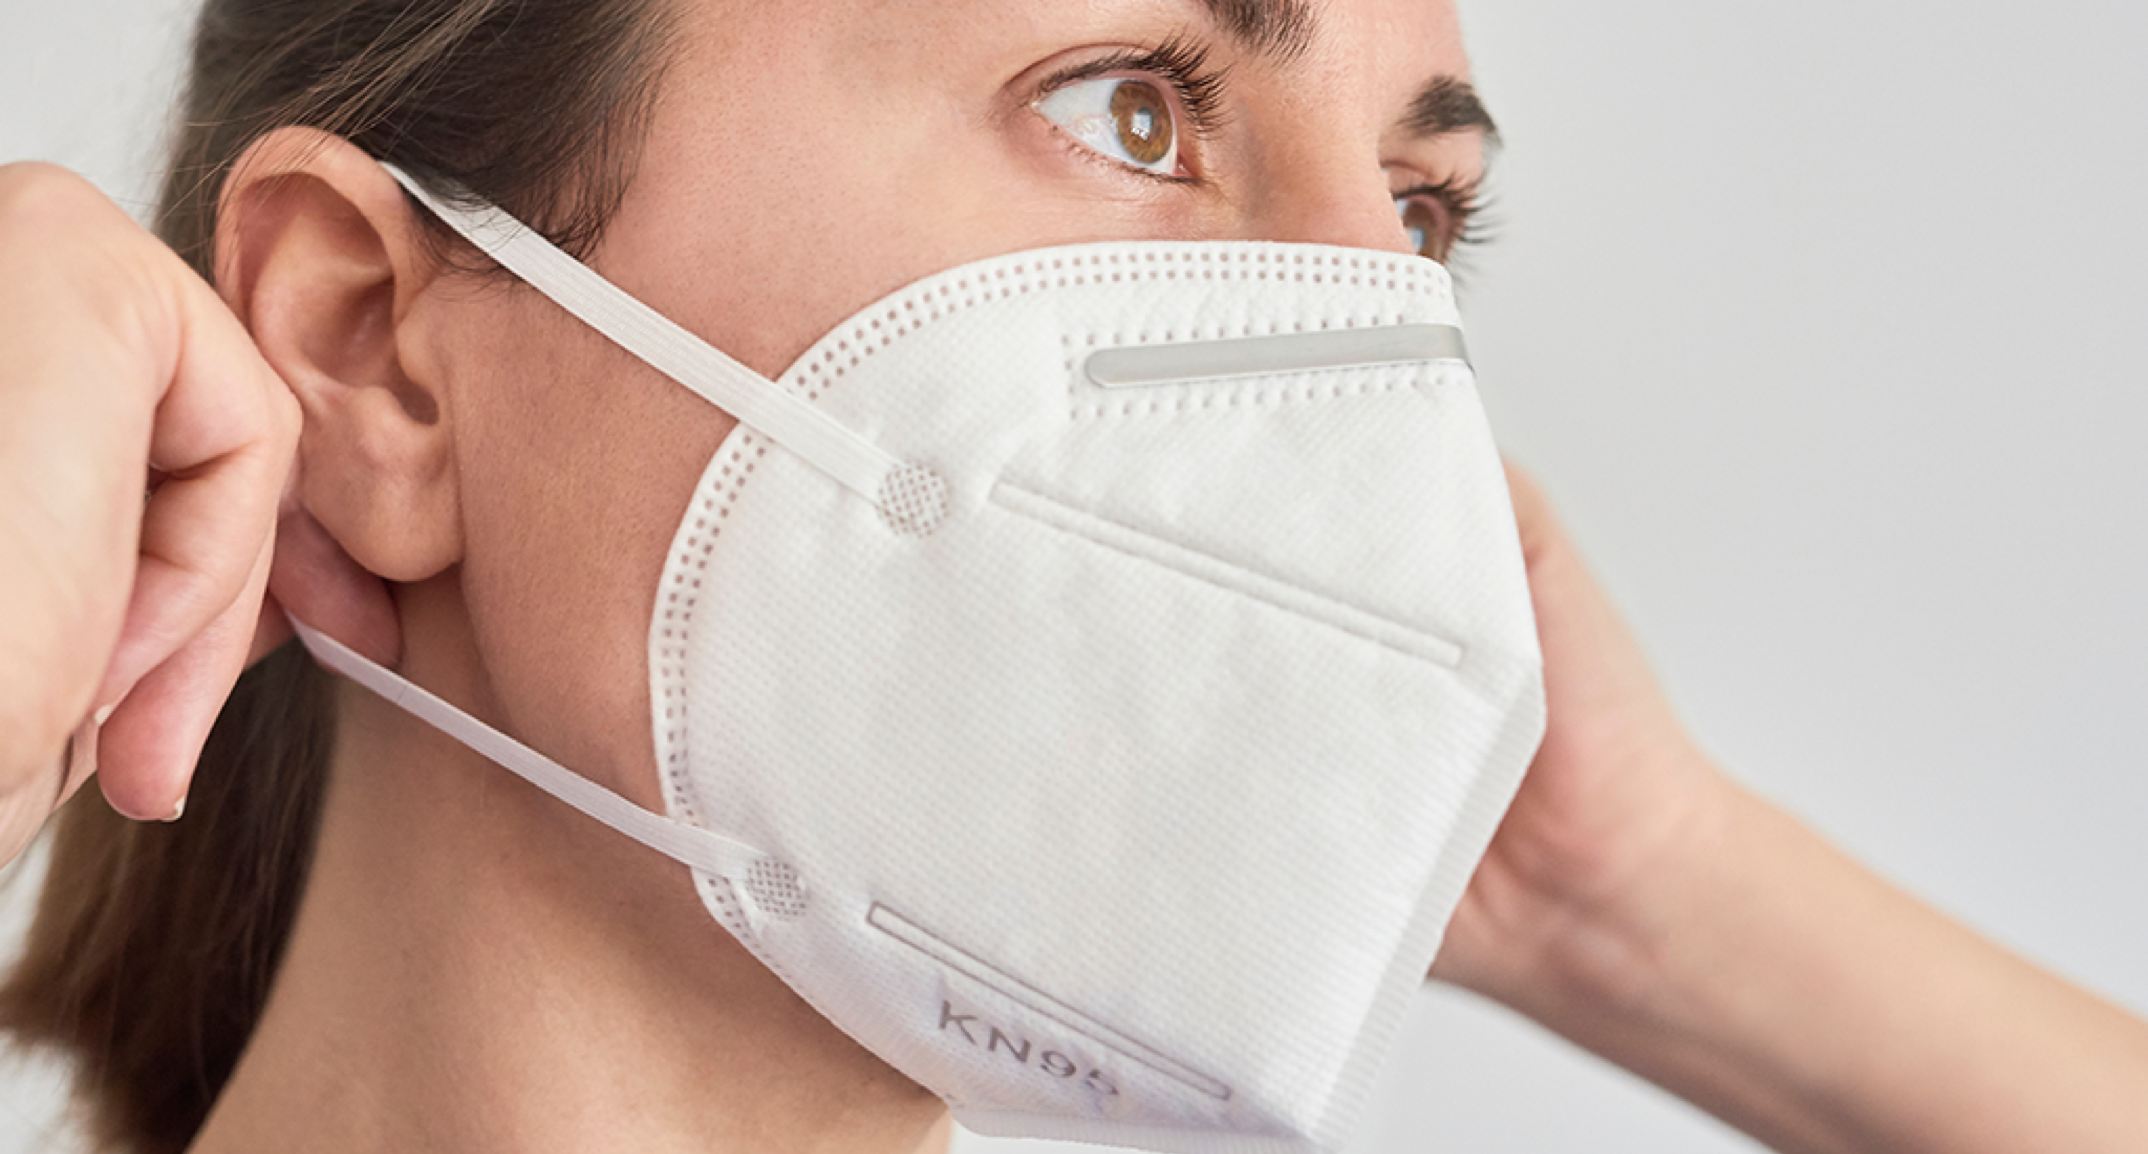 How Healthcare Workers Can Prevent Pressure Injuries From N95 Masks